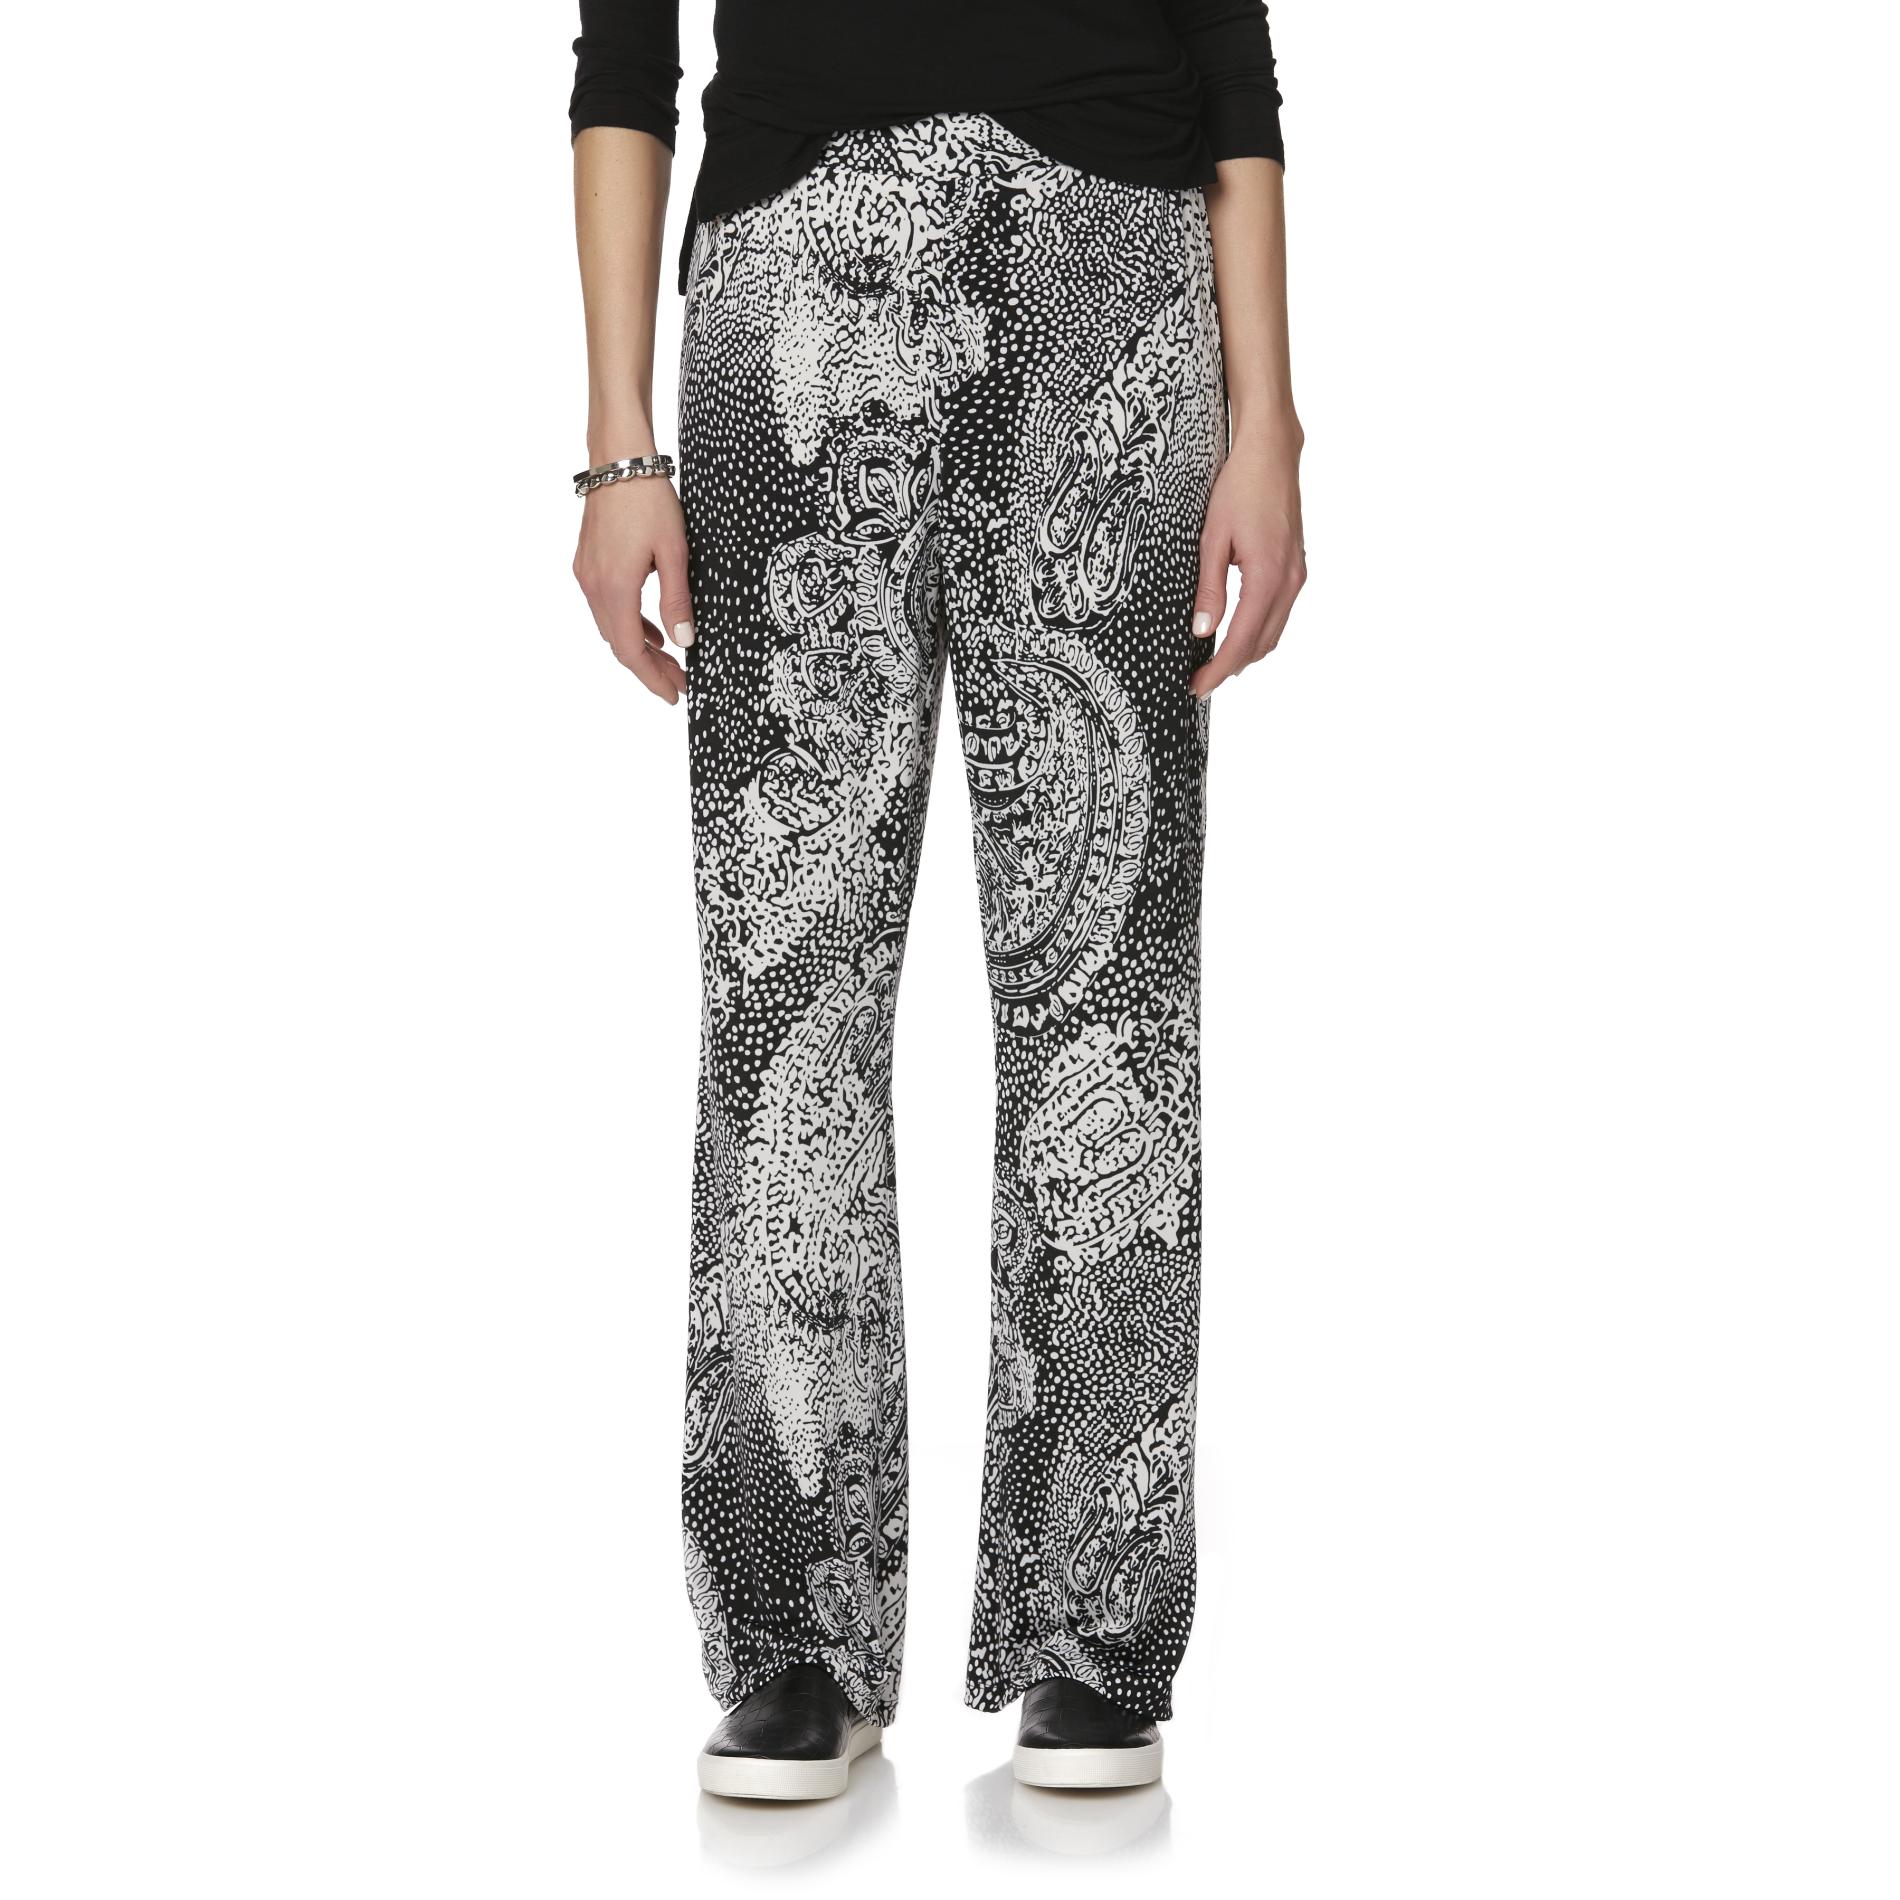 Simply Styled Women's Knit Pants - Abstract